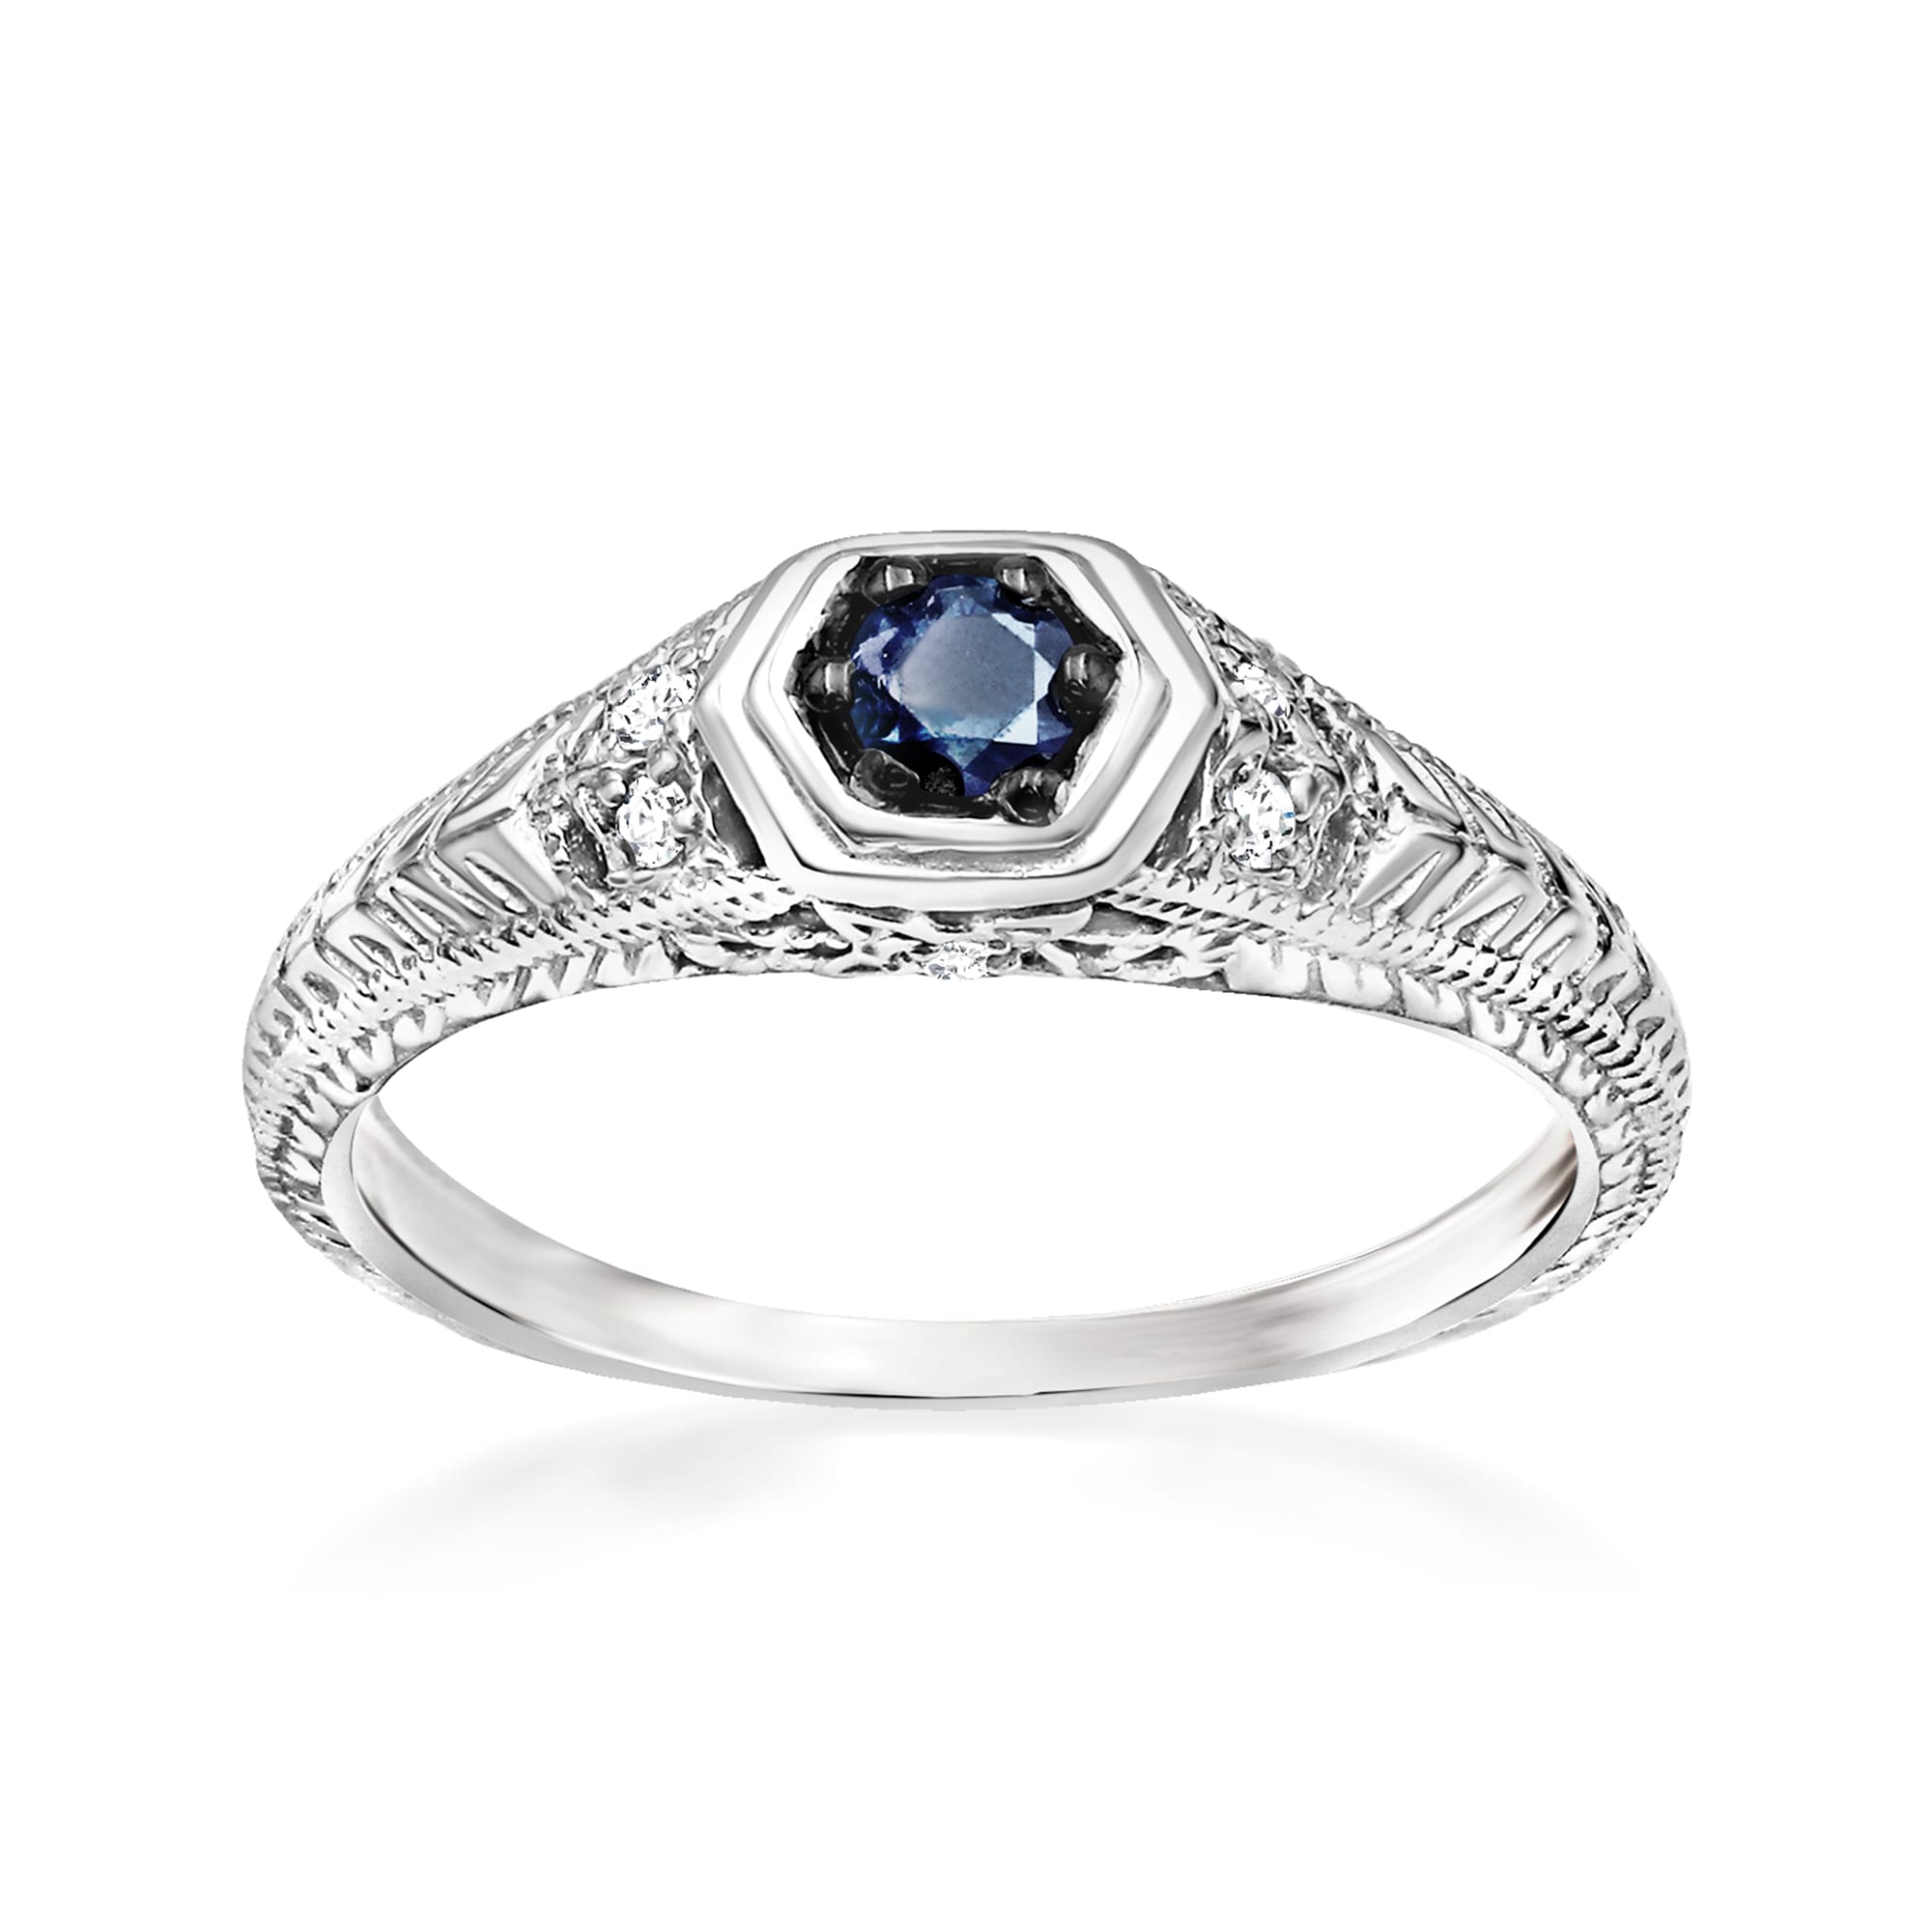 .18 Carat Blue Diamond Ring with White Diamond Accents in Sterling ...